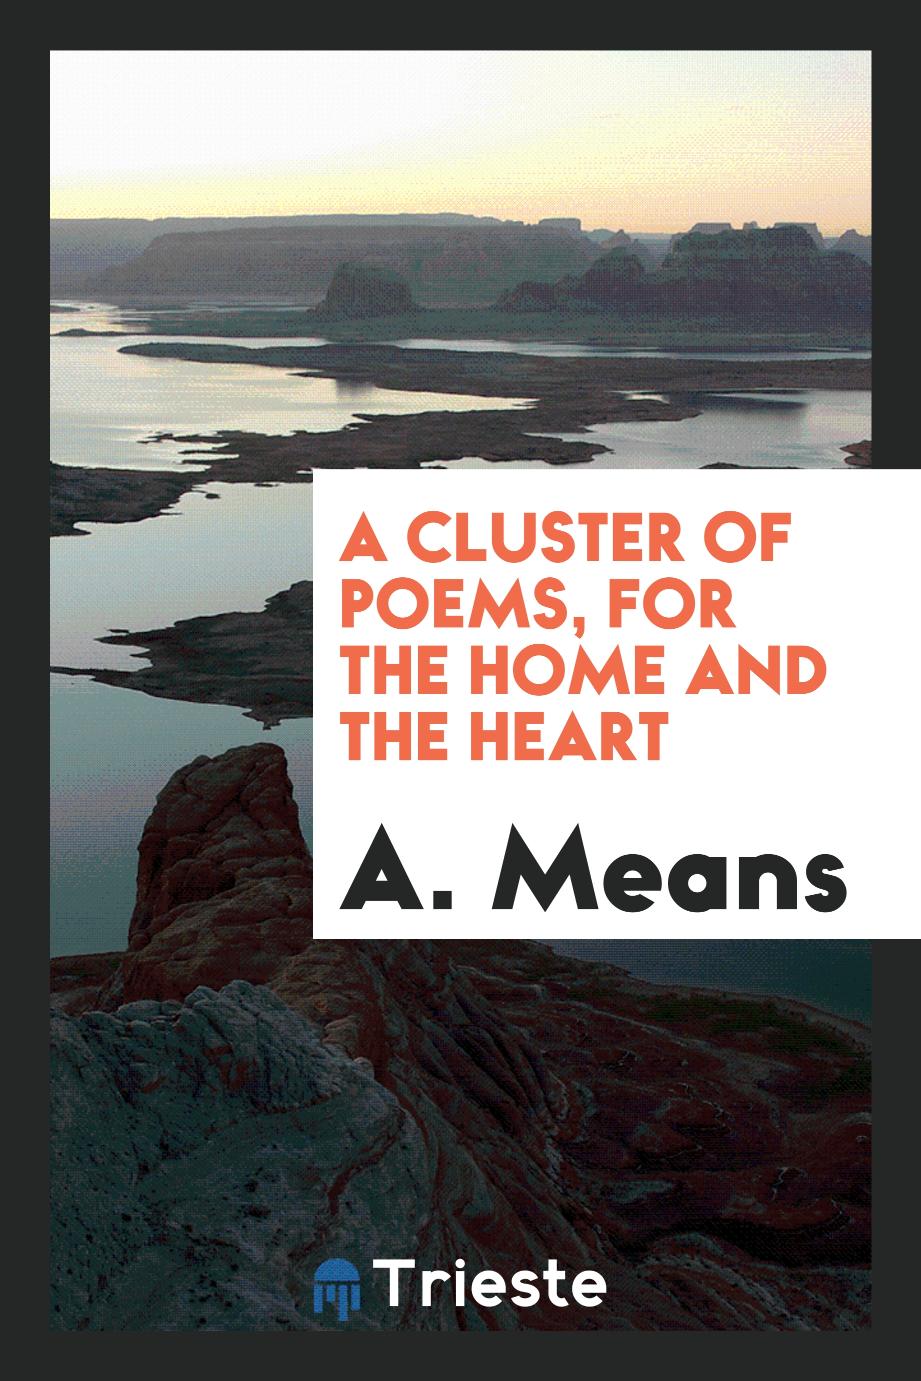 A cluster of poems, for the home and the heart